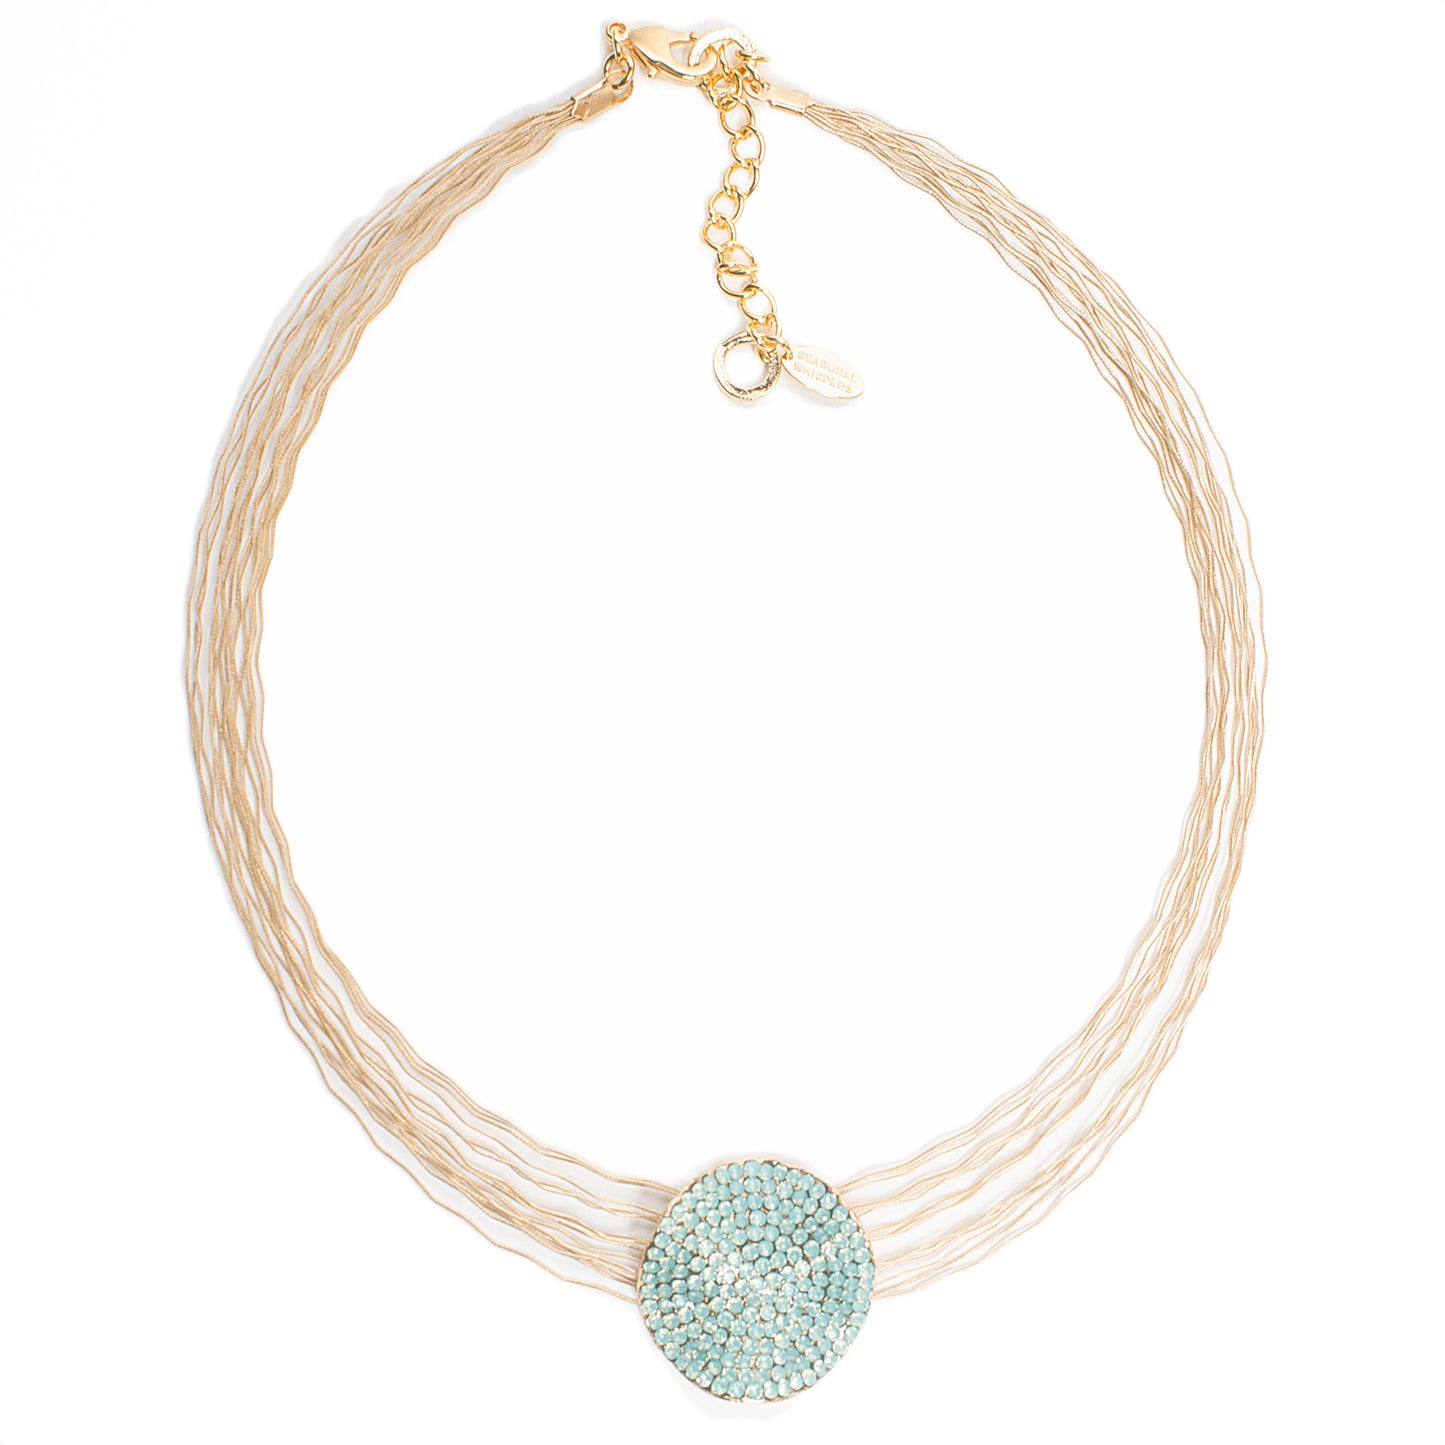 Handmade Love Necklace 8249: Turquoise Opal / Gold